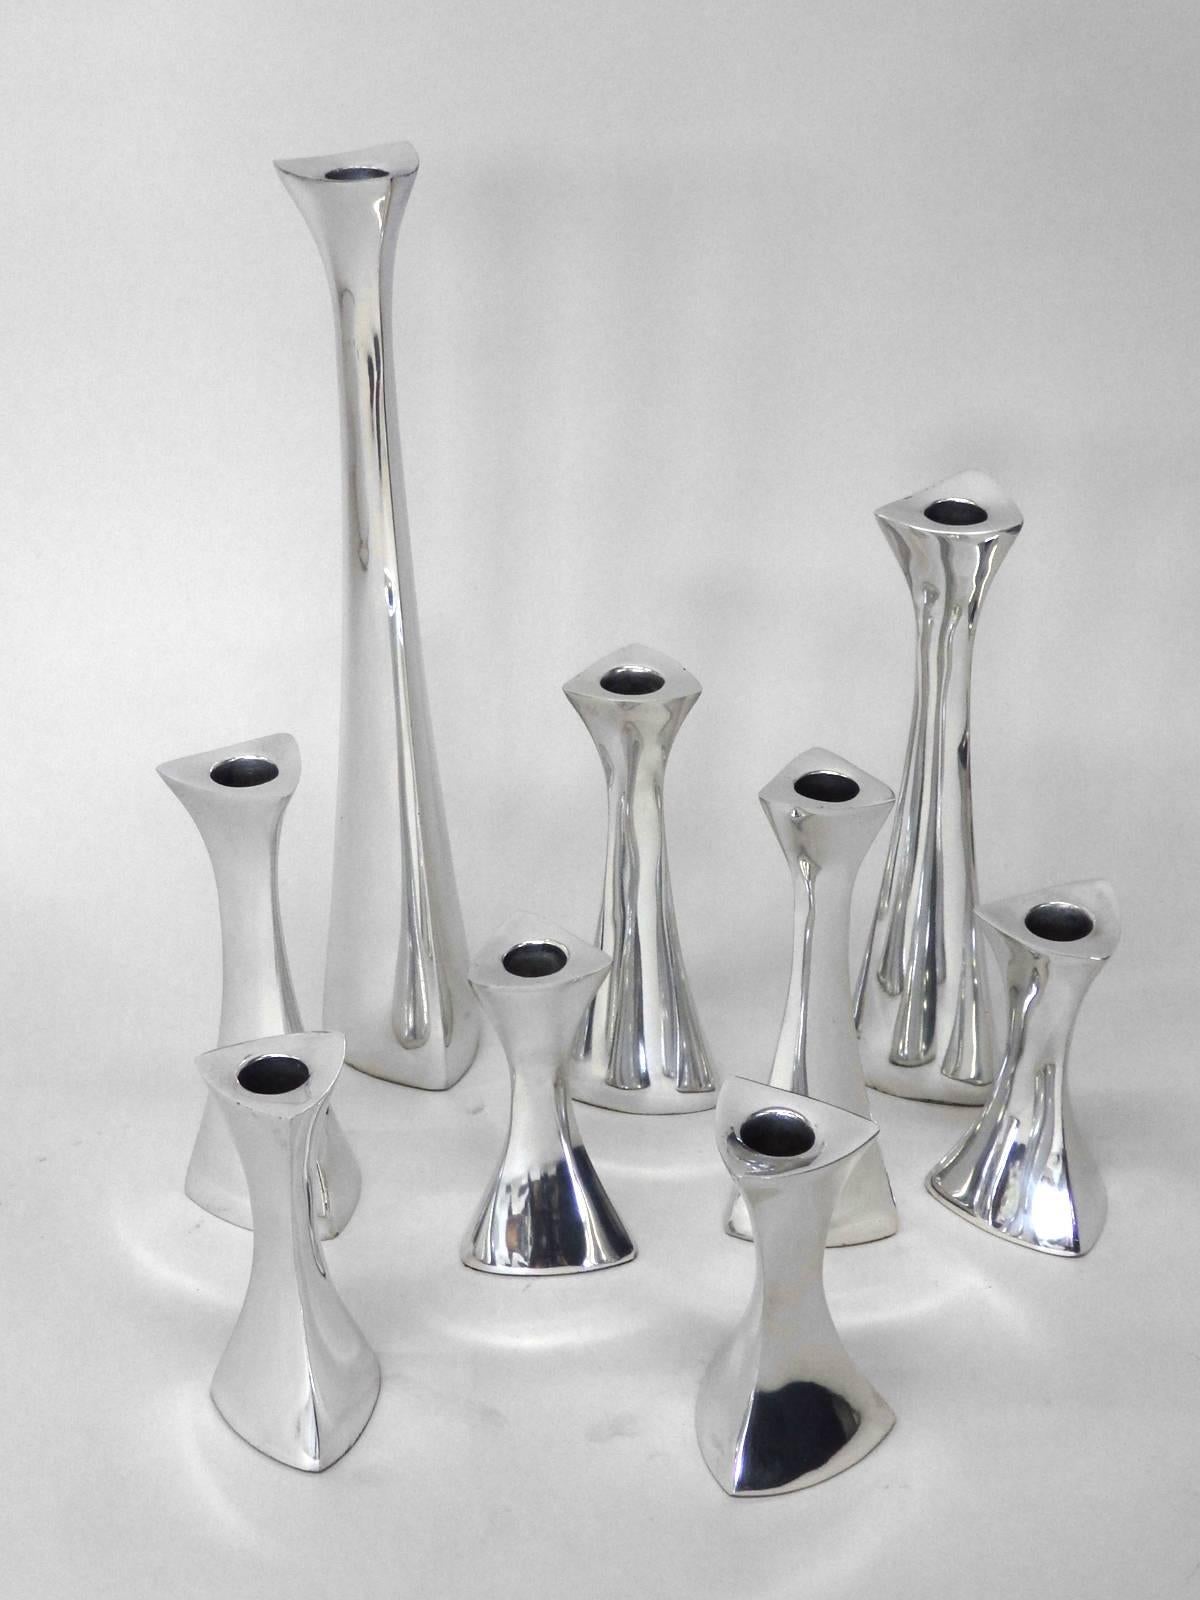 Twelve in total . Cast and polished aluminum candle sticks . Richard K. Thomas designer for Nambe
Bases measure: 2 5/8” wide x 2 5/8” deep, 2 at tallest at 14.25”, one at 9.5